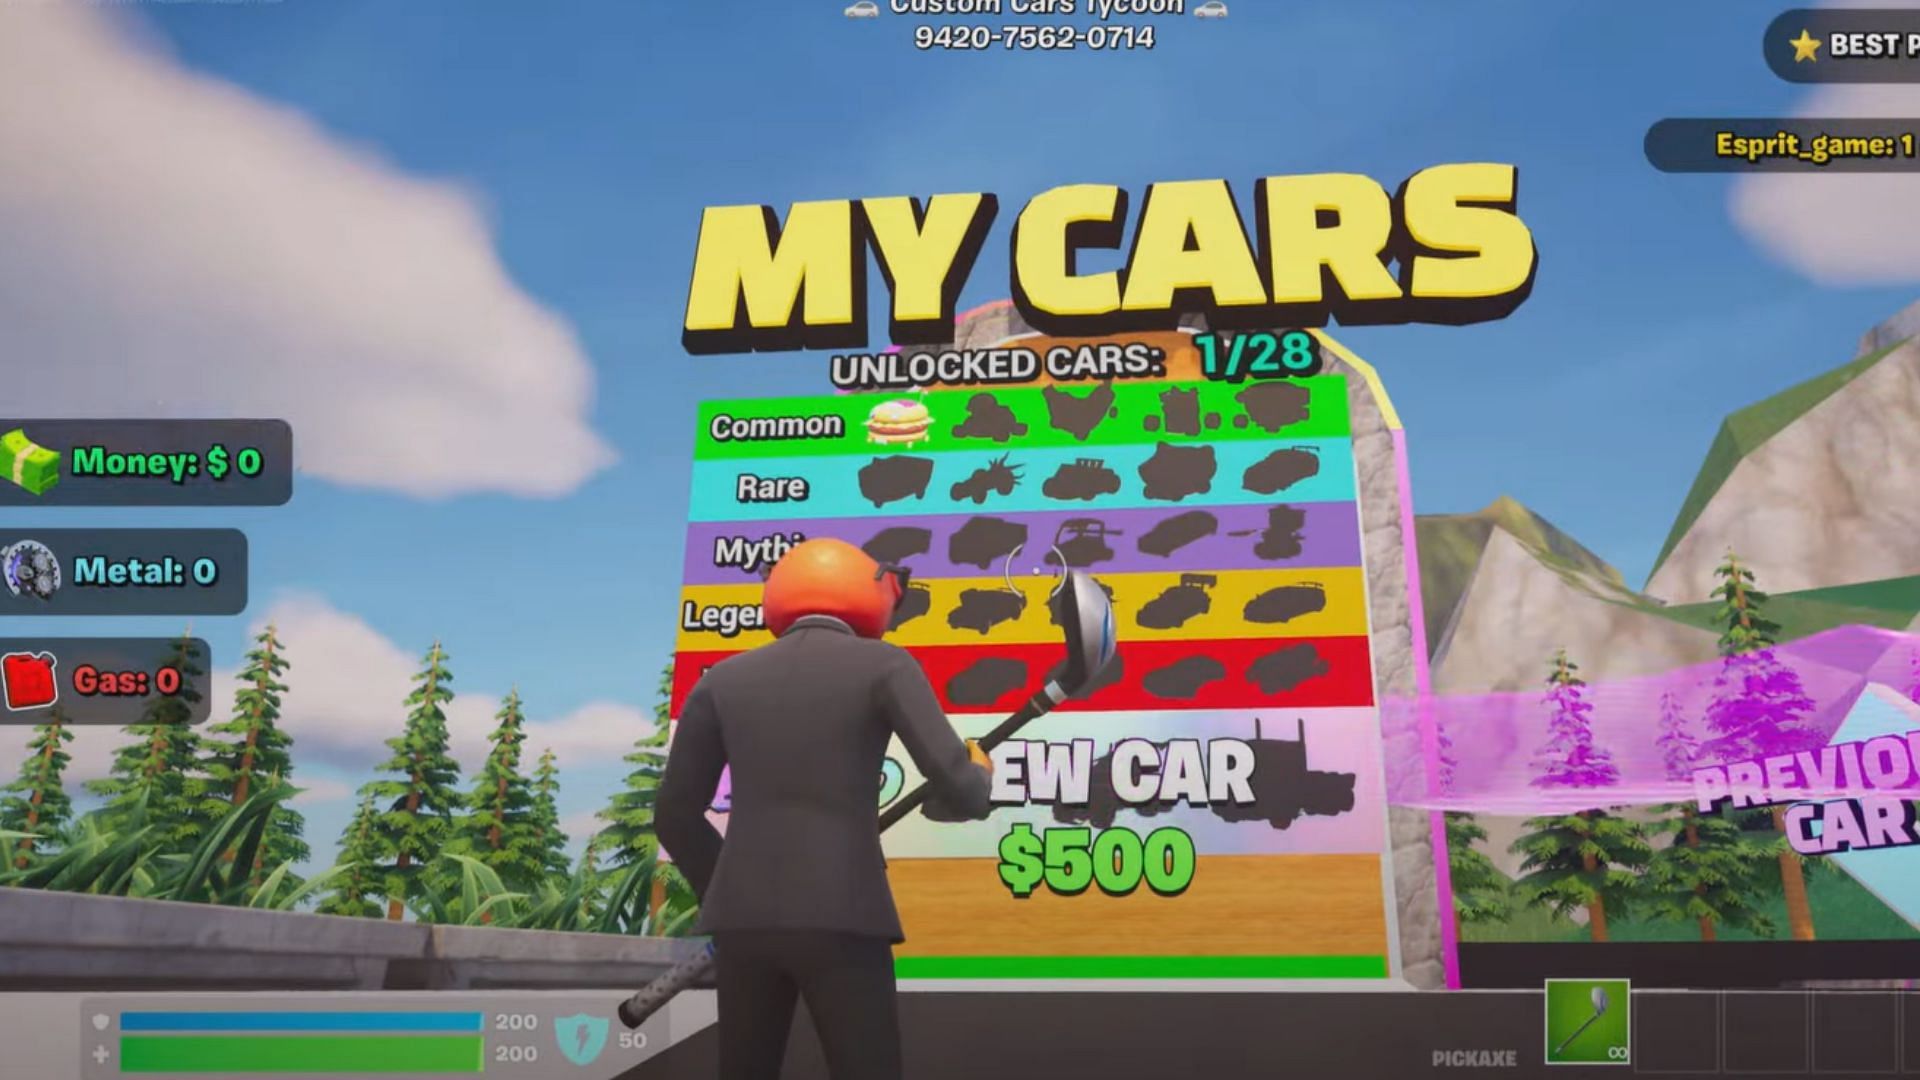 Players can unlock up to 28 vehicles in the Custom Cars Tycoon map (Image via ESPIRITGAME on YouTube)